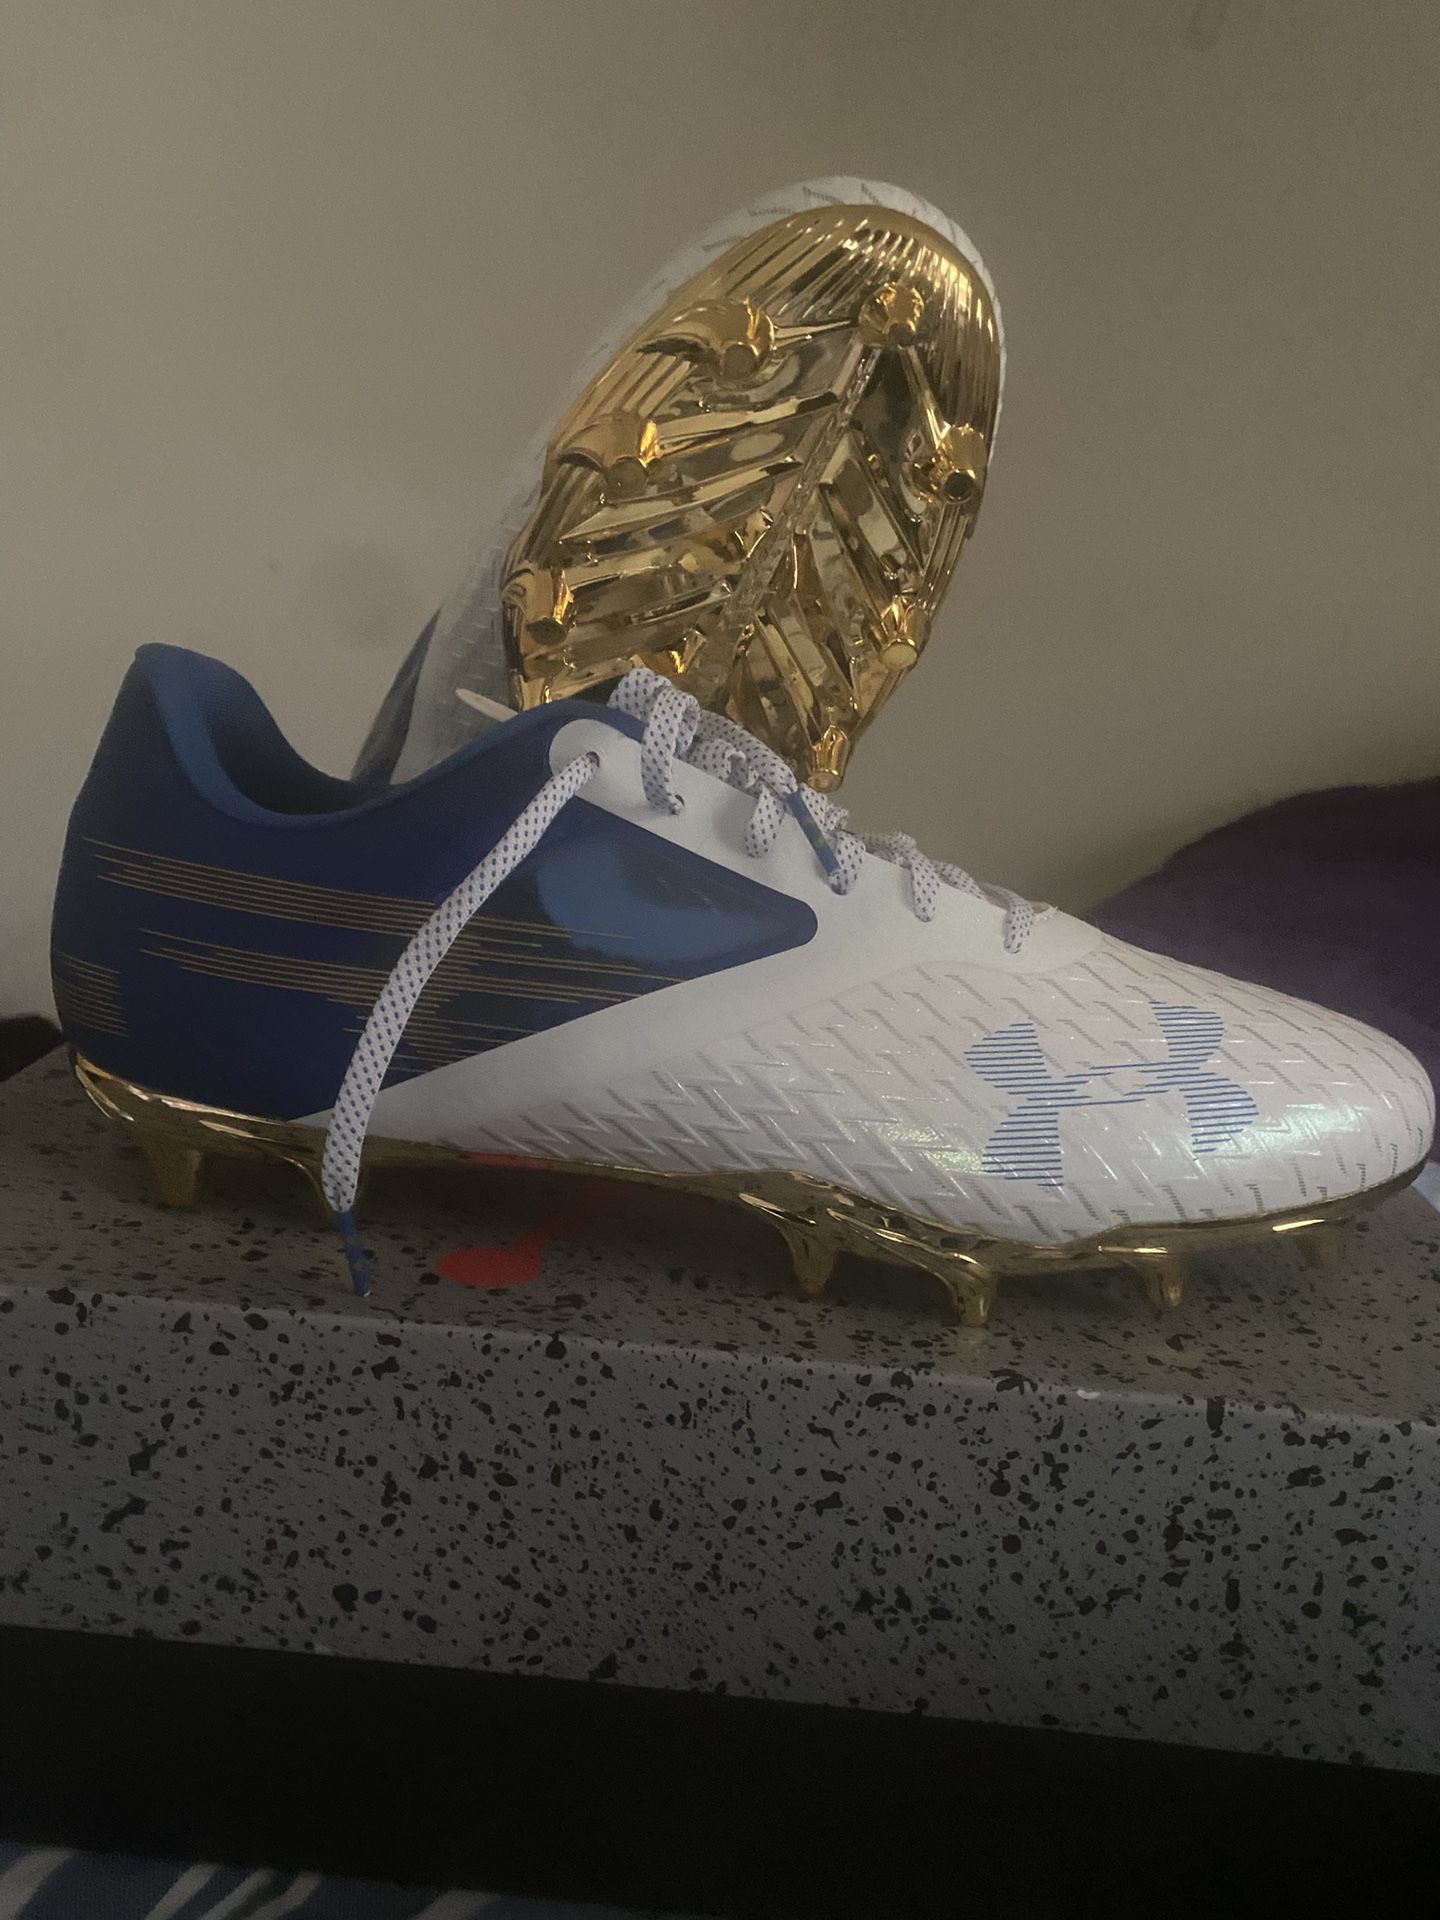 🚨NEW UA Blurr Cleats (Navy Blue,white & Gold) 